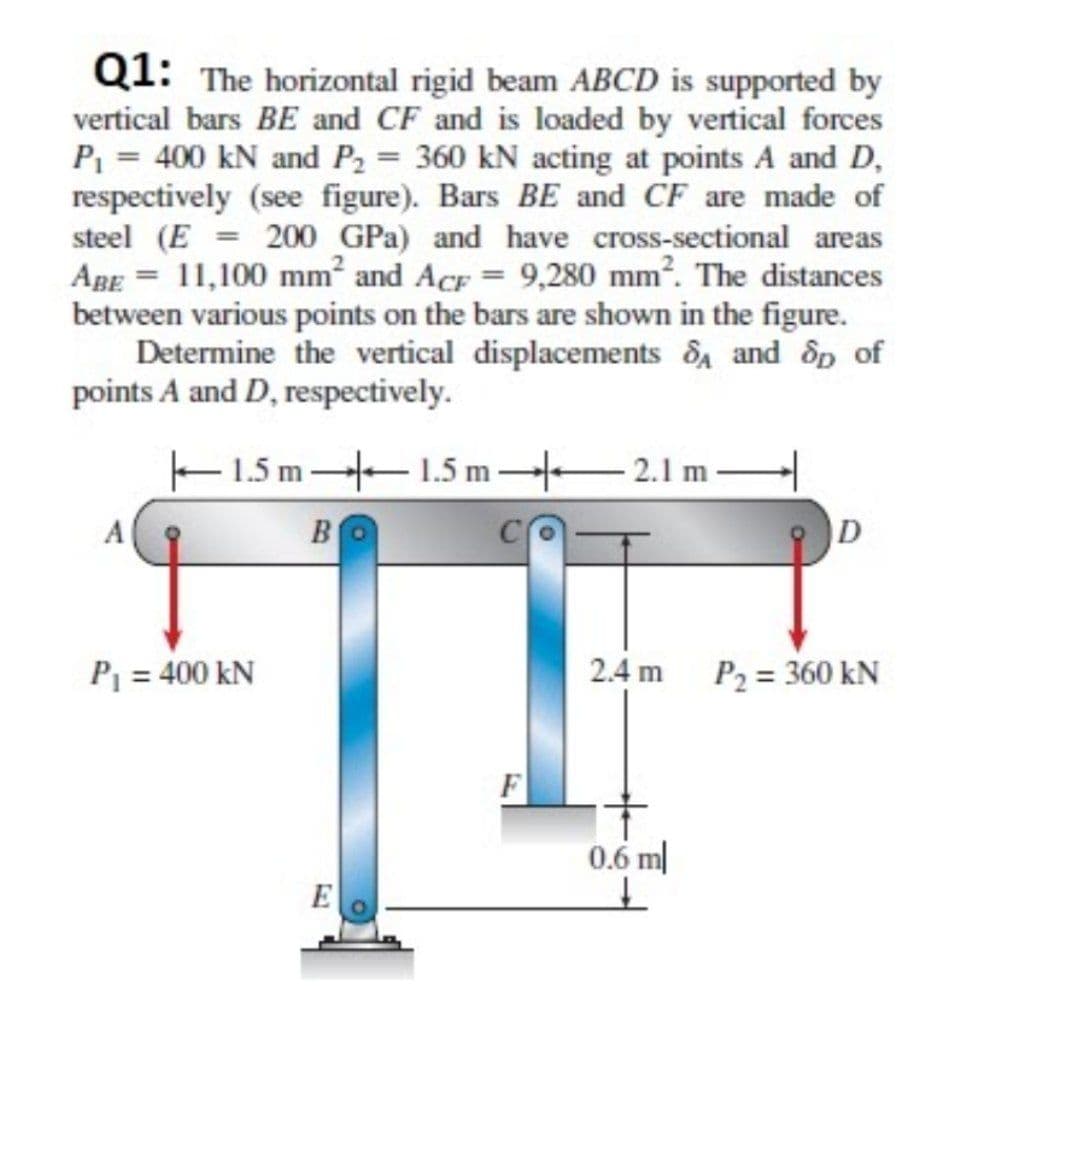 Q1: The horizontal rigid beam ABCD is supported by
vertical bars BE and CF and is loaded by vertical forces
P = 400 kN and P2 = 360 kN acting at points A and D,
respectively (see figure). Bars BE and CF are made of
steel (E = 200 GPa) and have cross-sectional areas
ABE = 11,100 mm and AcF = 9,280 mm?. The distances
between various points on the bars are shown in the figure.
Determine the vertical displacements d, and dp of
points A and D, respectively.
E1.5 m - 1.5 m 2.1 m
B
P = 400 kN
2.4 m
P2 = 360 kN
F
0.6 m|
E
